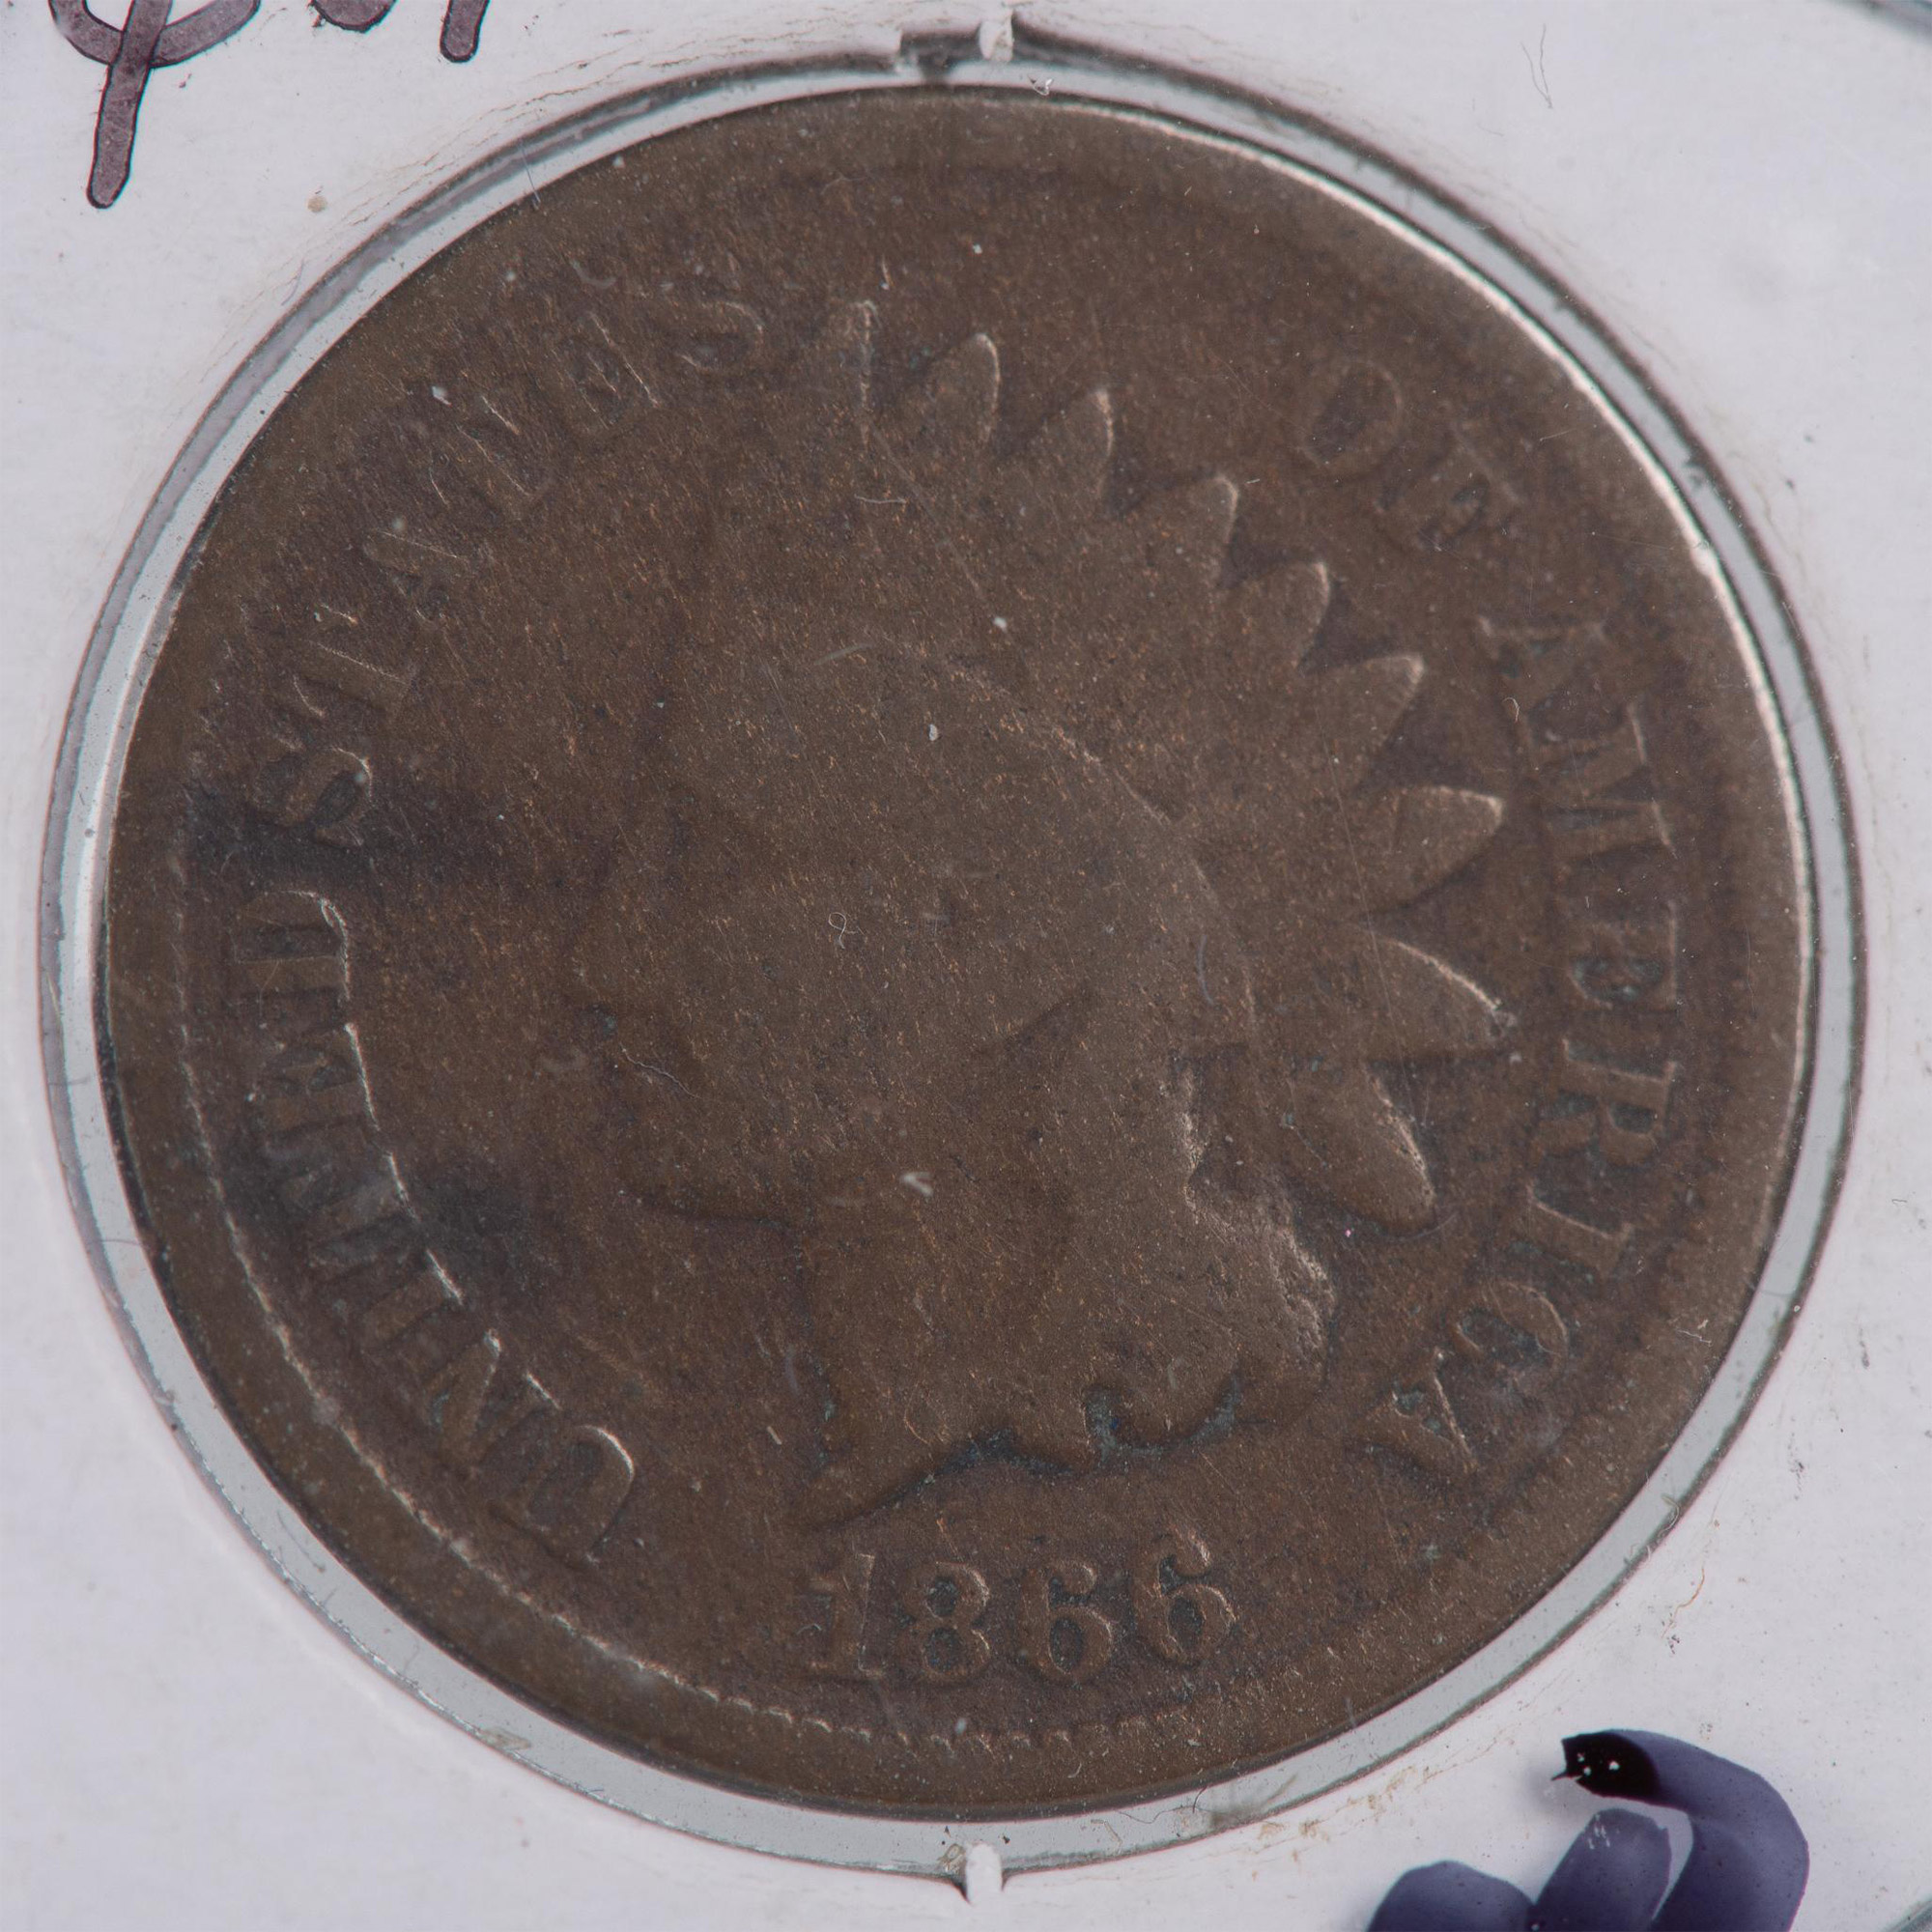 2 US INDIAN HEAD CENT COINS: 1865 & 1866 - Image 2 of 6